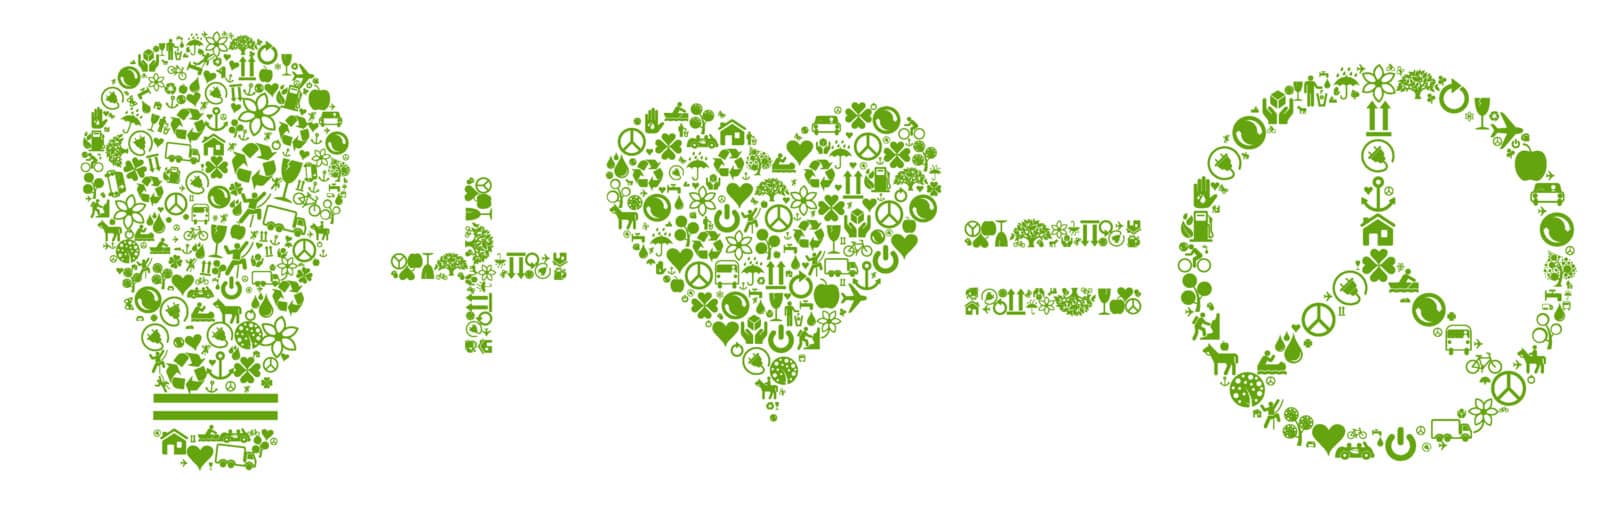 Ecology concept made of eco icons vector for poster